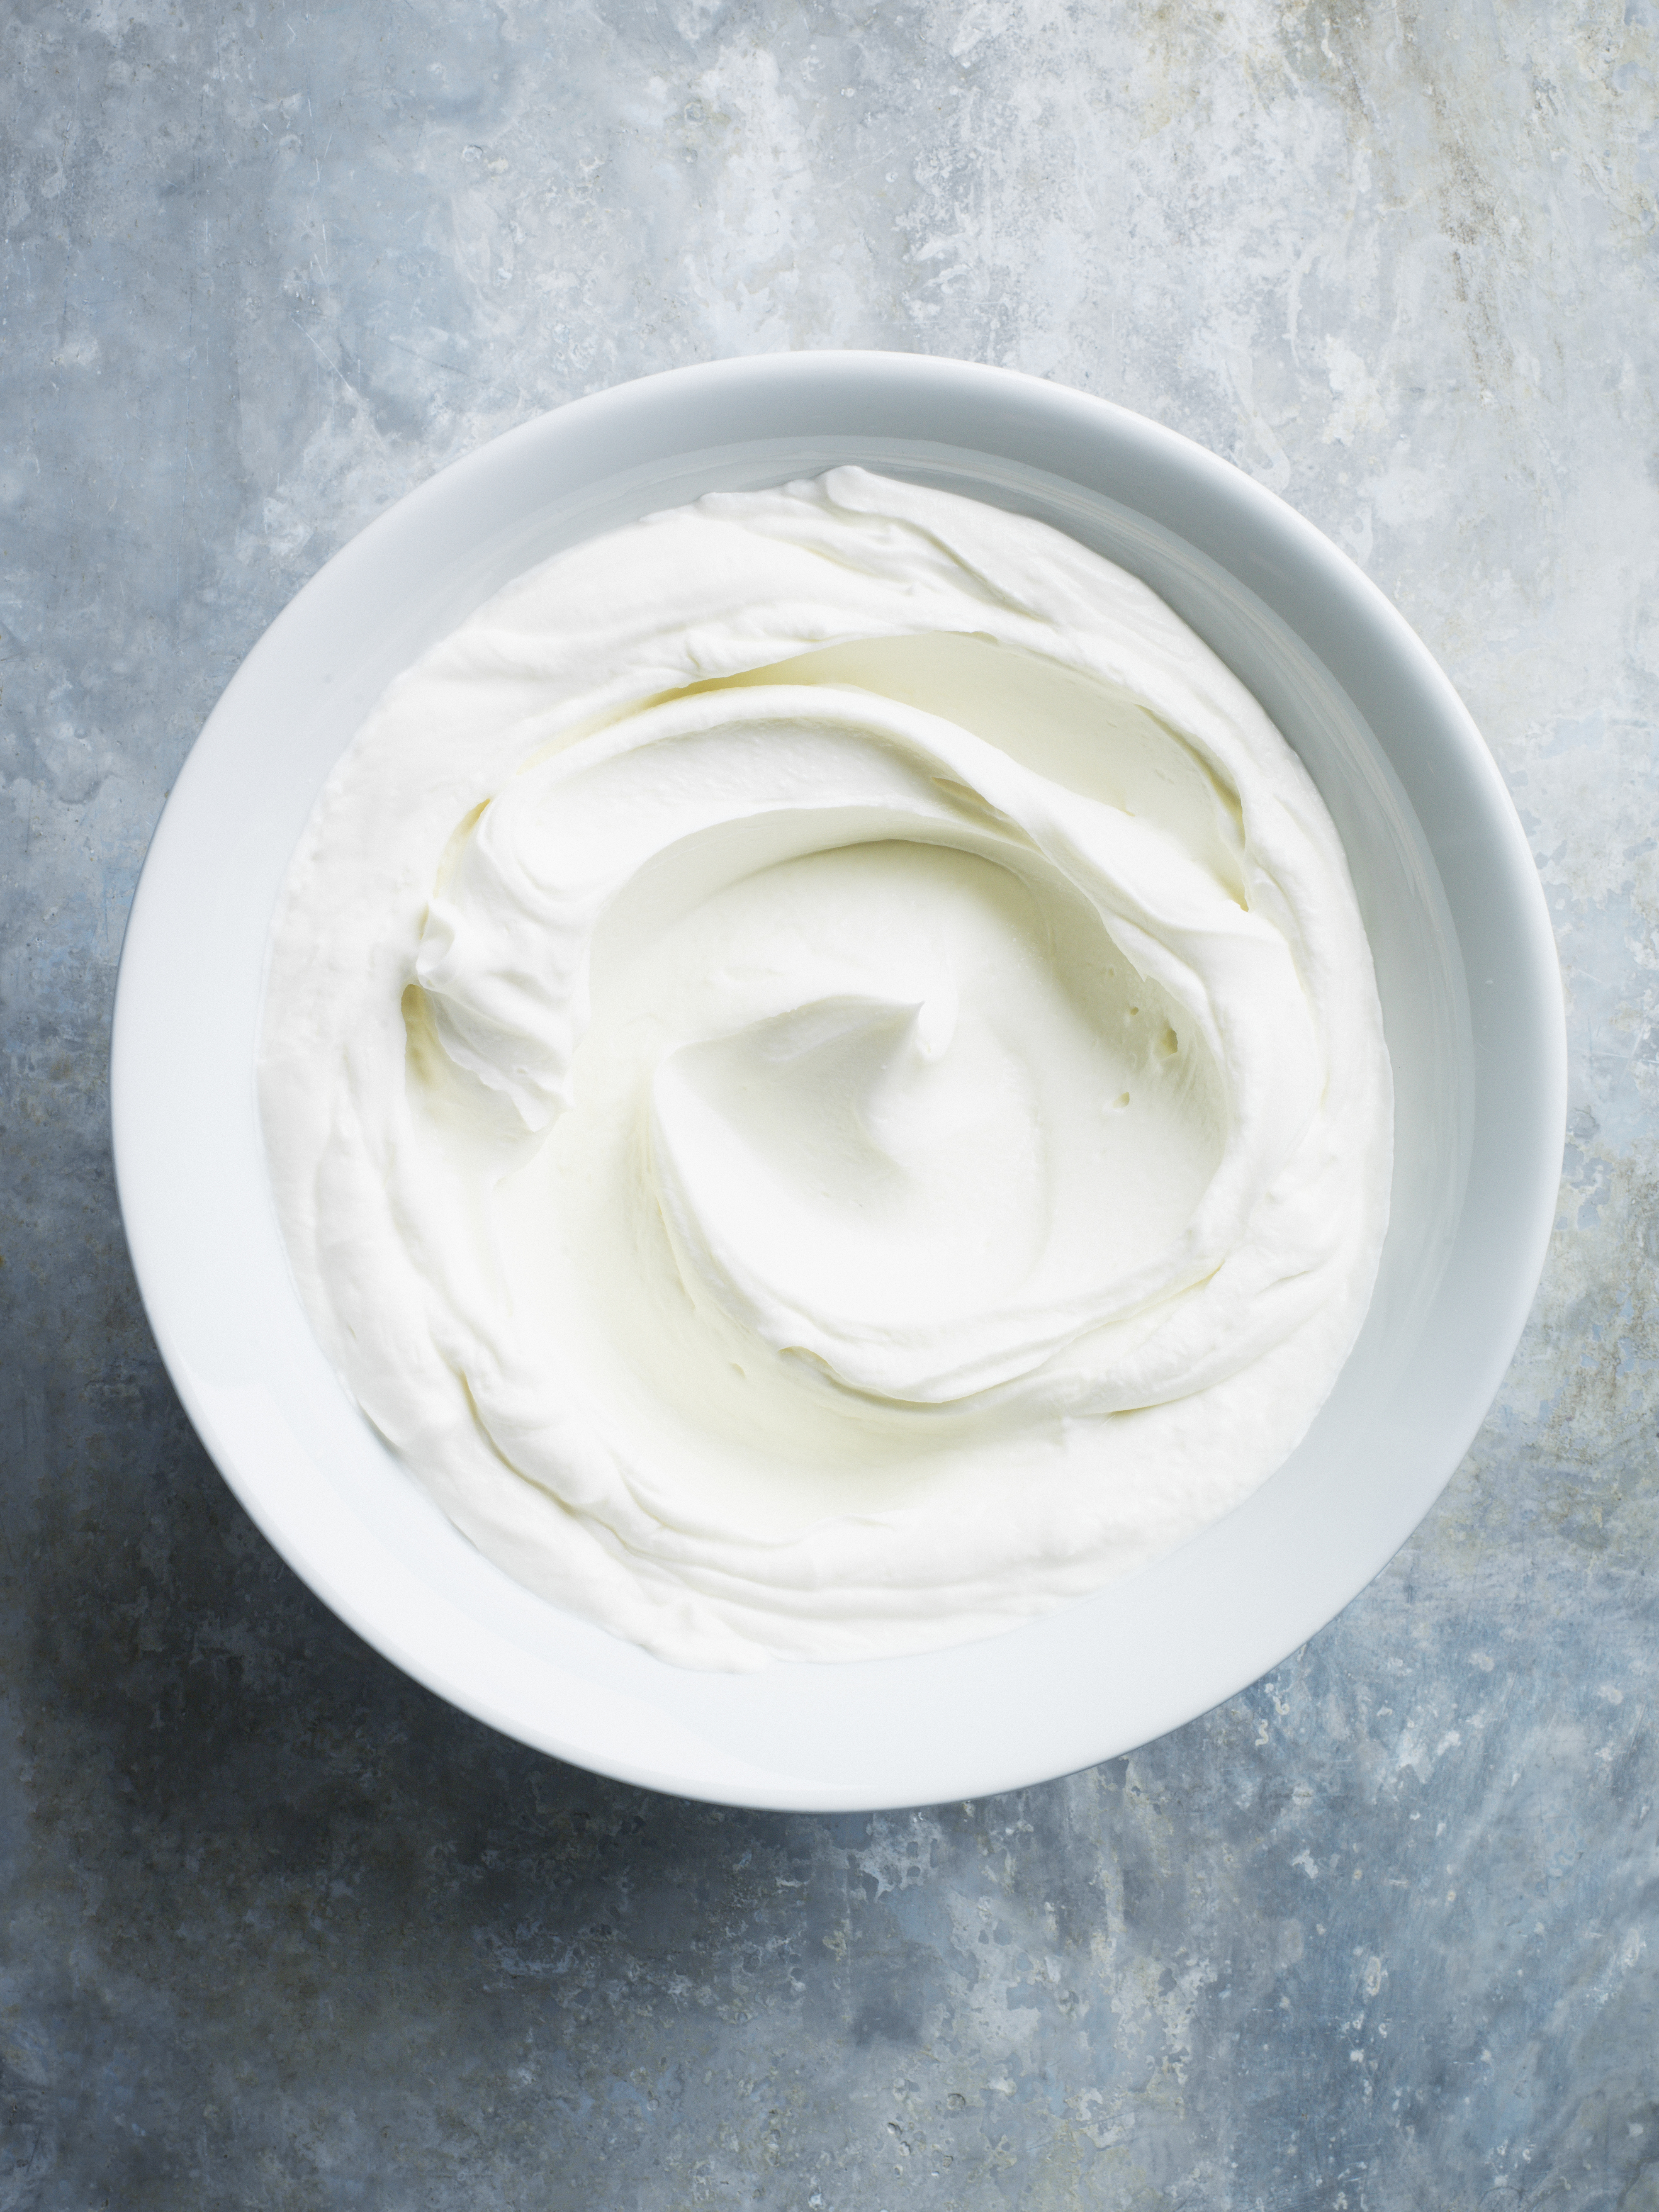 A bowl of whipped cream on a textured surface, viewed from above